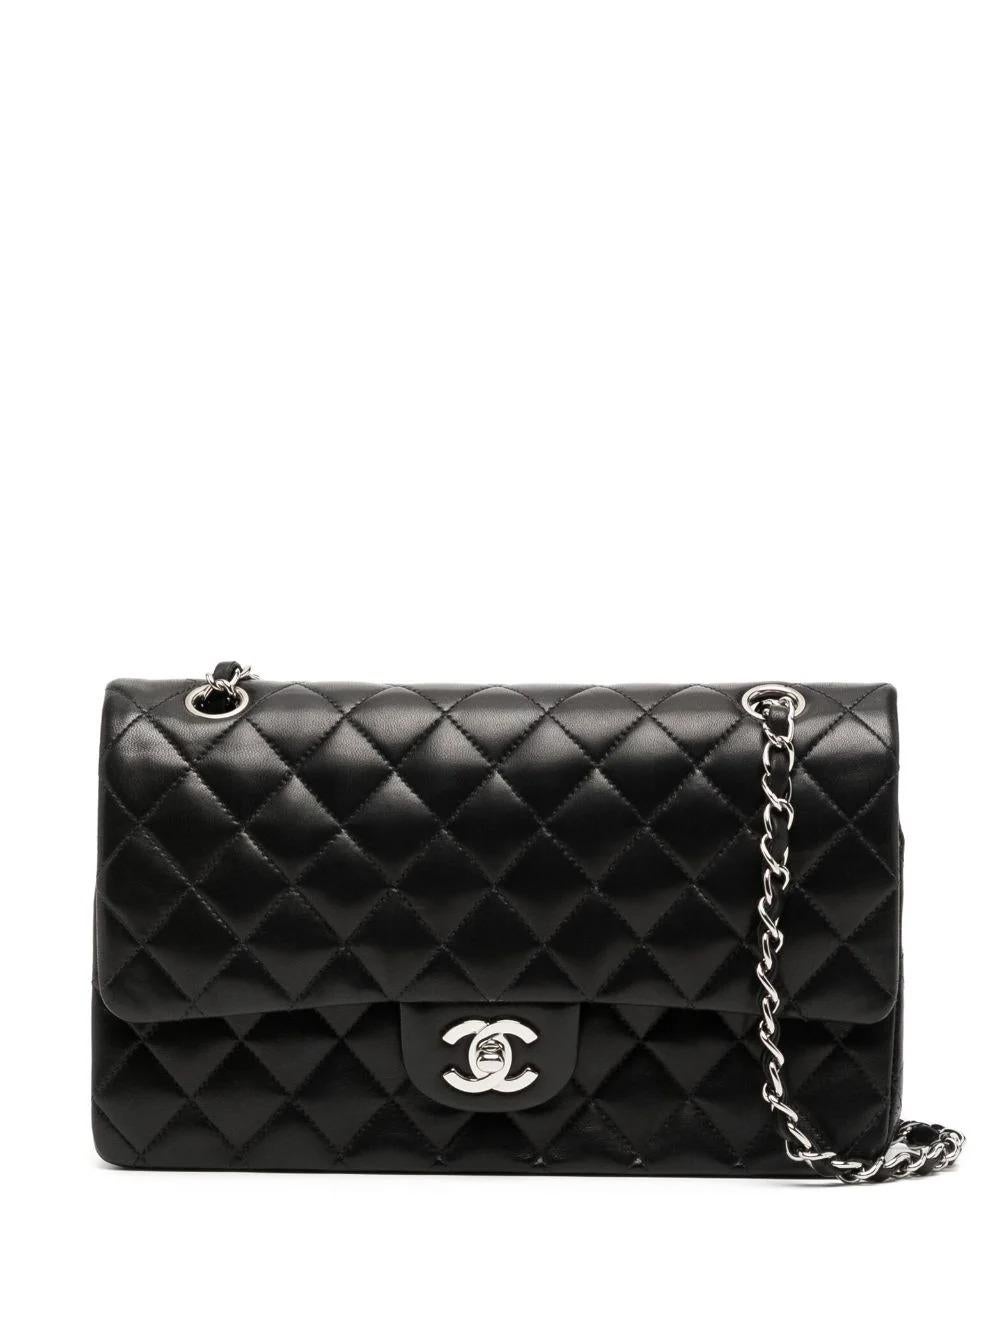 Chanel 2006 Vintage 2.55 Quilted Lambskin Medium Classic Double Flap Bag  In Good Condition For Sale In Miami, FL